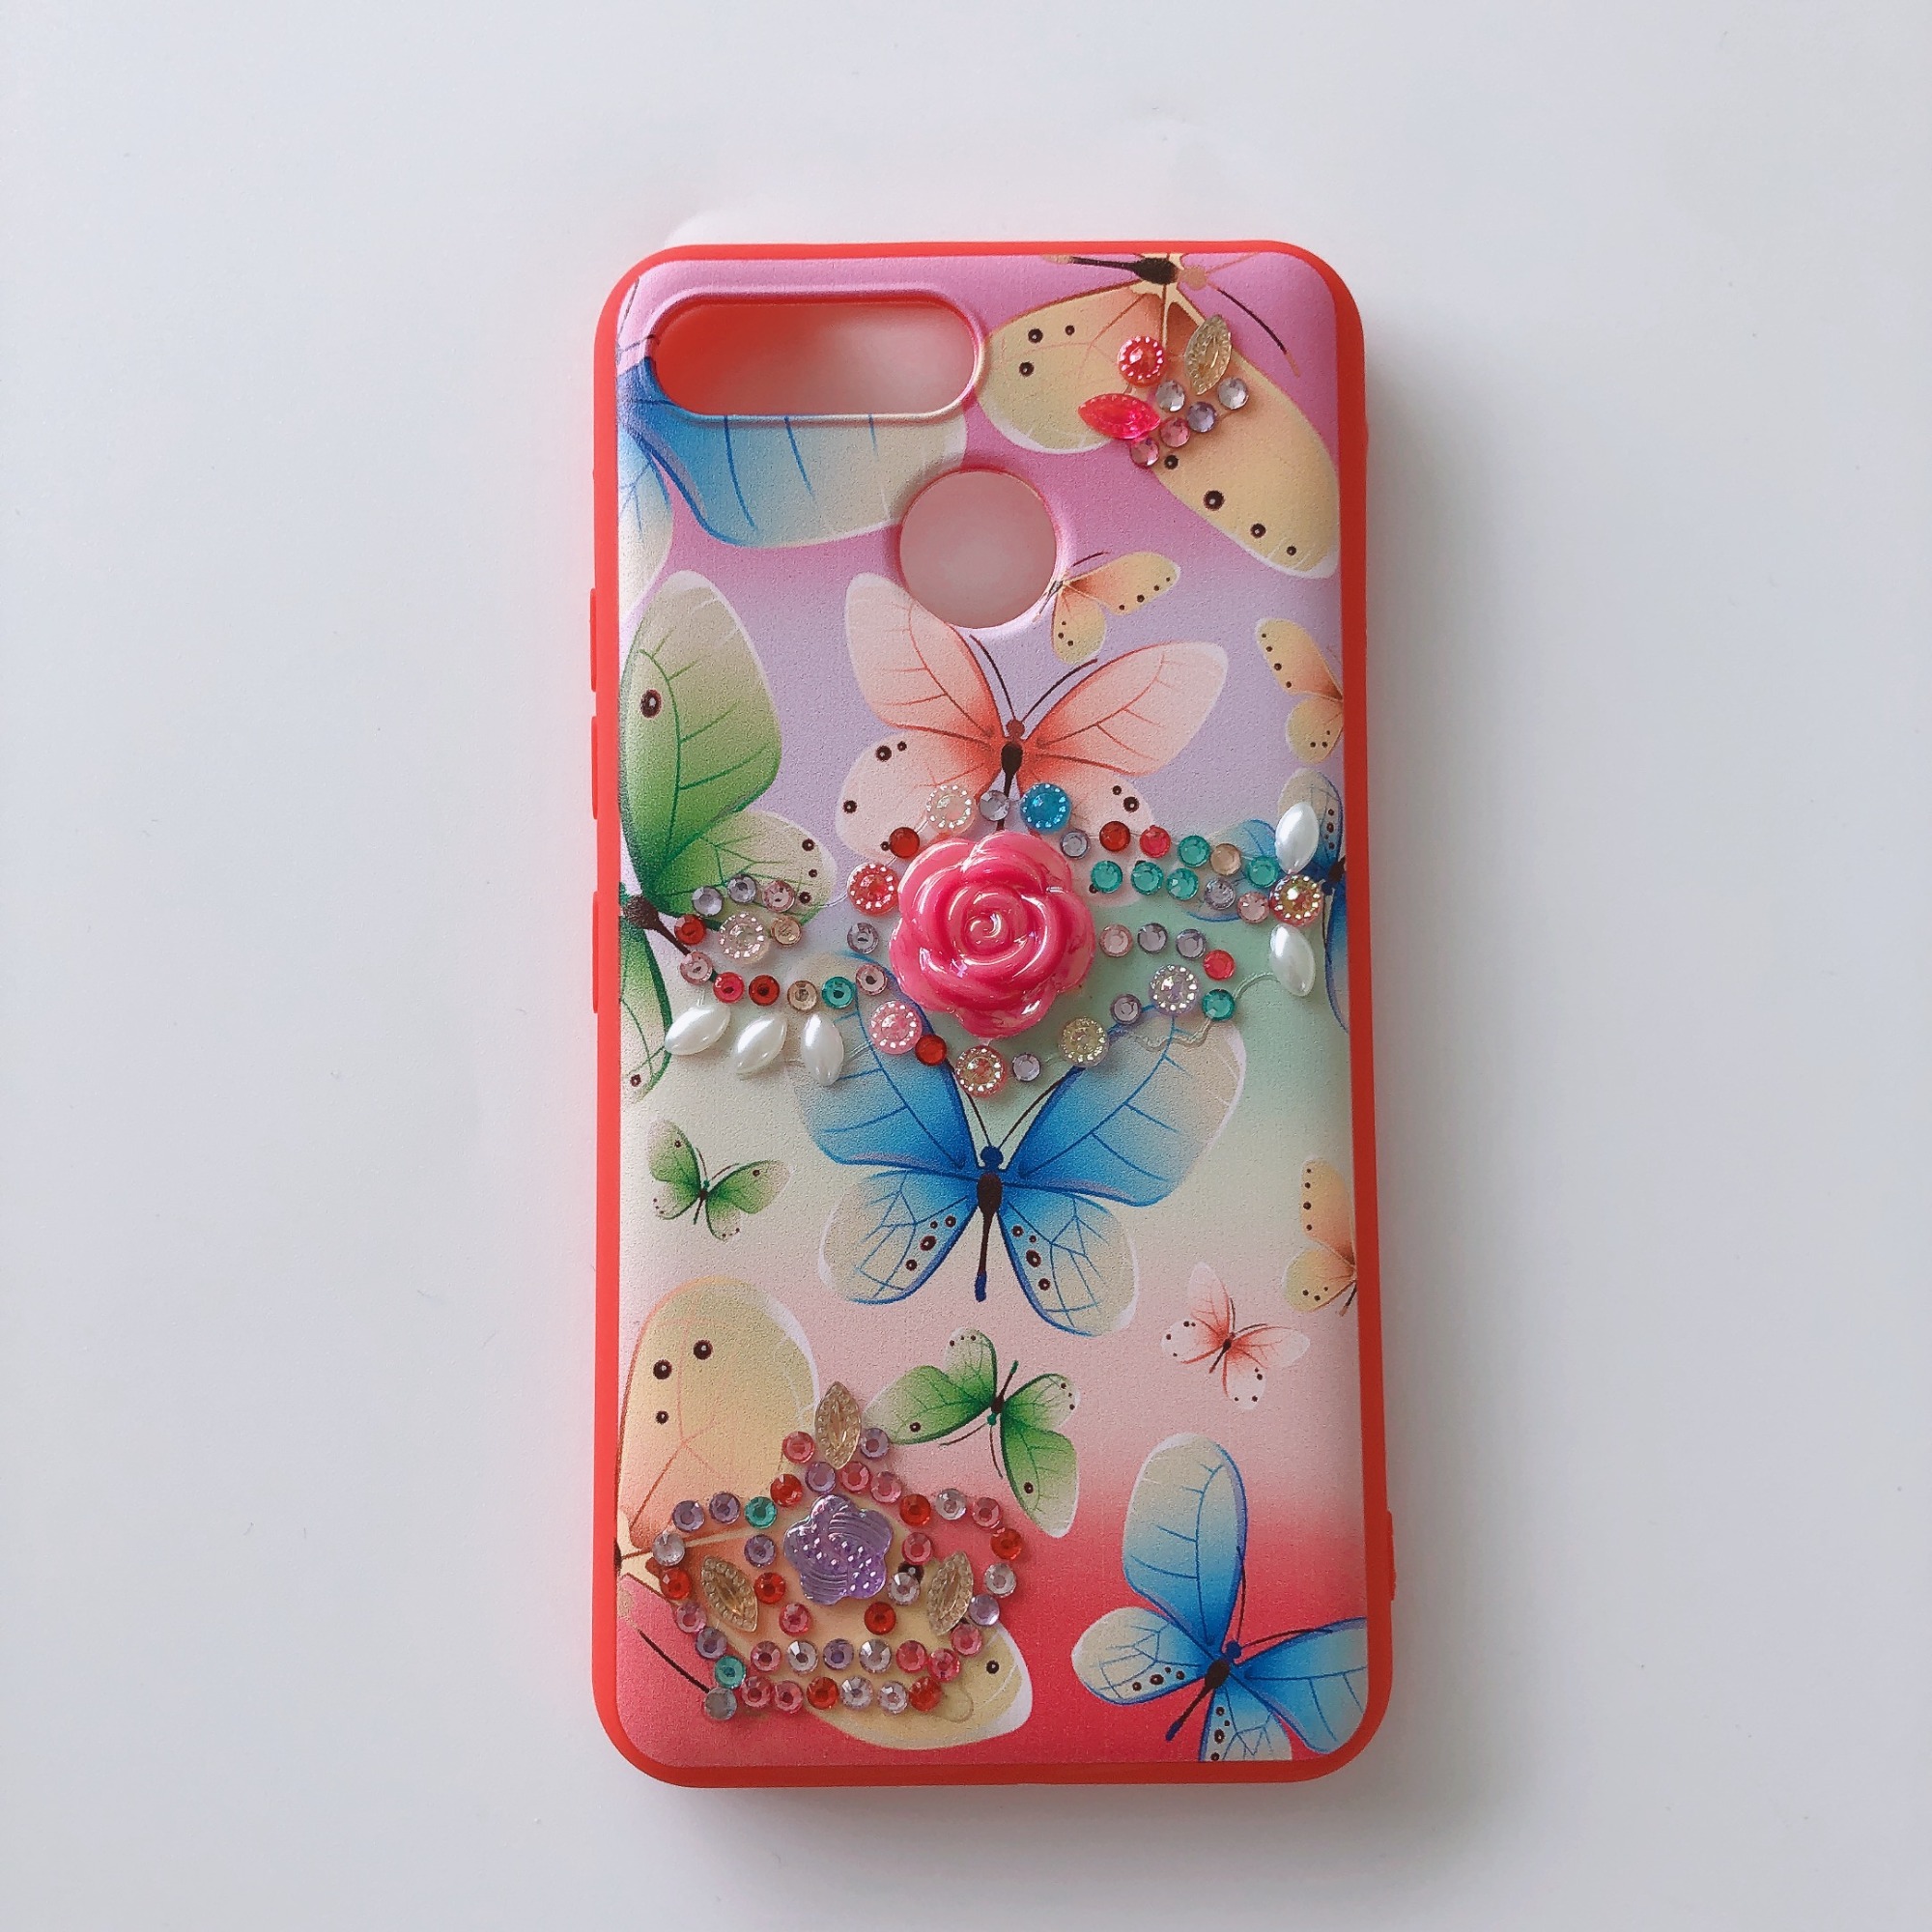 New Design Crystal Real Dry Flower with diamond Phone Case for itel s15 p15